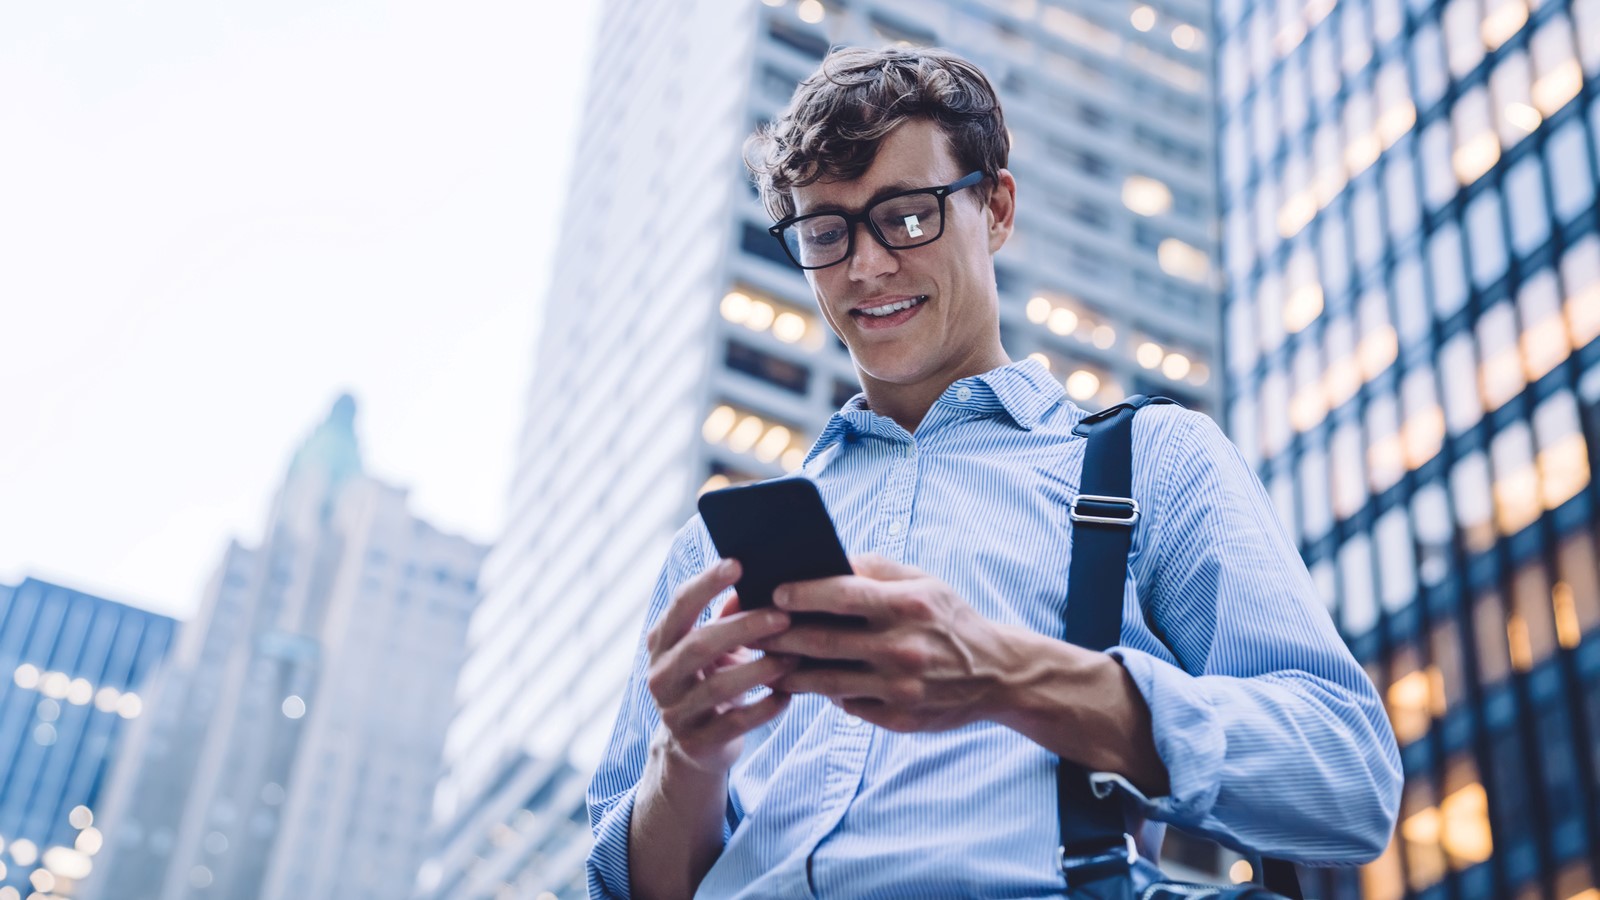 Enterprise mobile management: how to choose the right partner